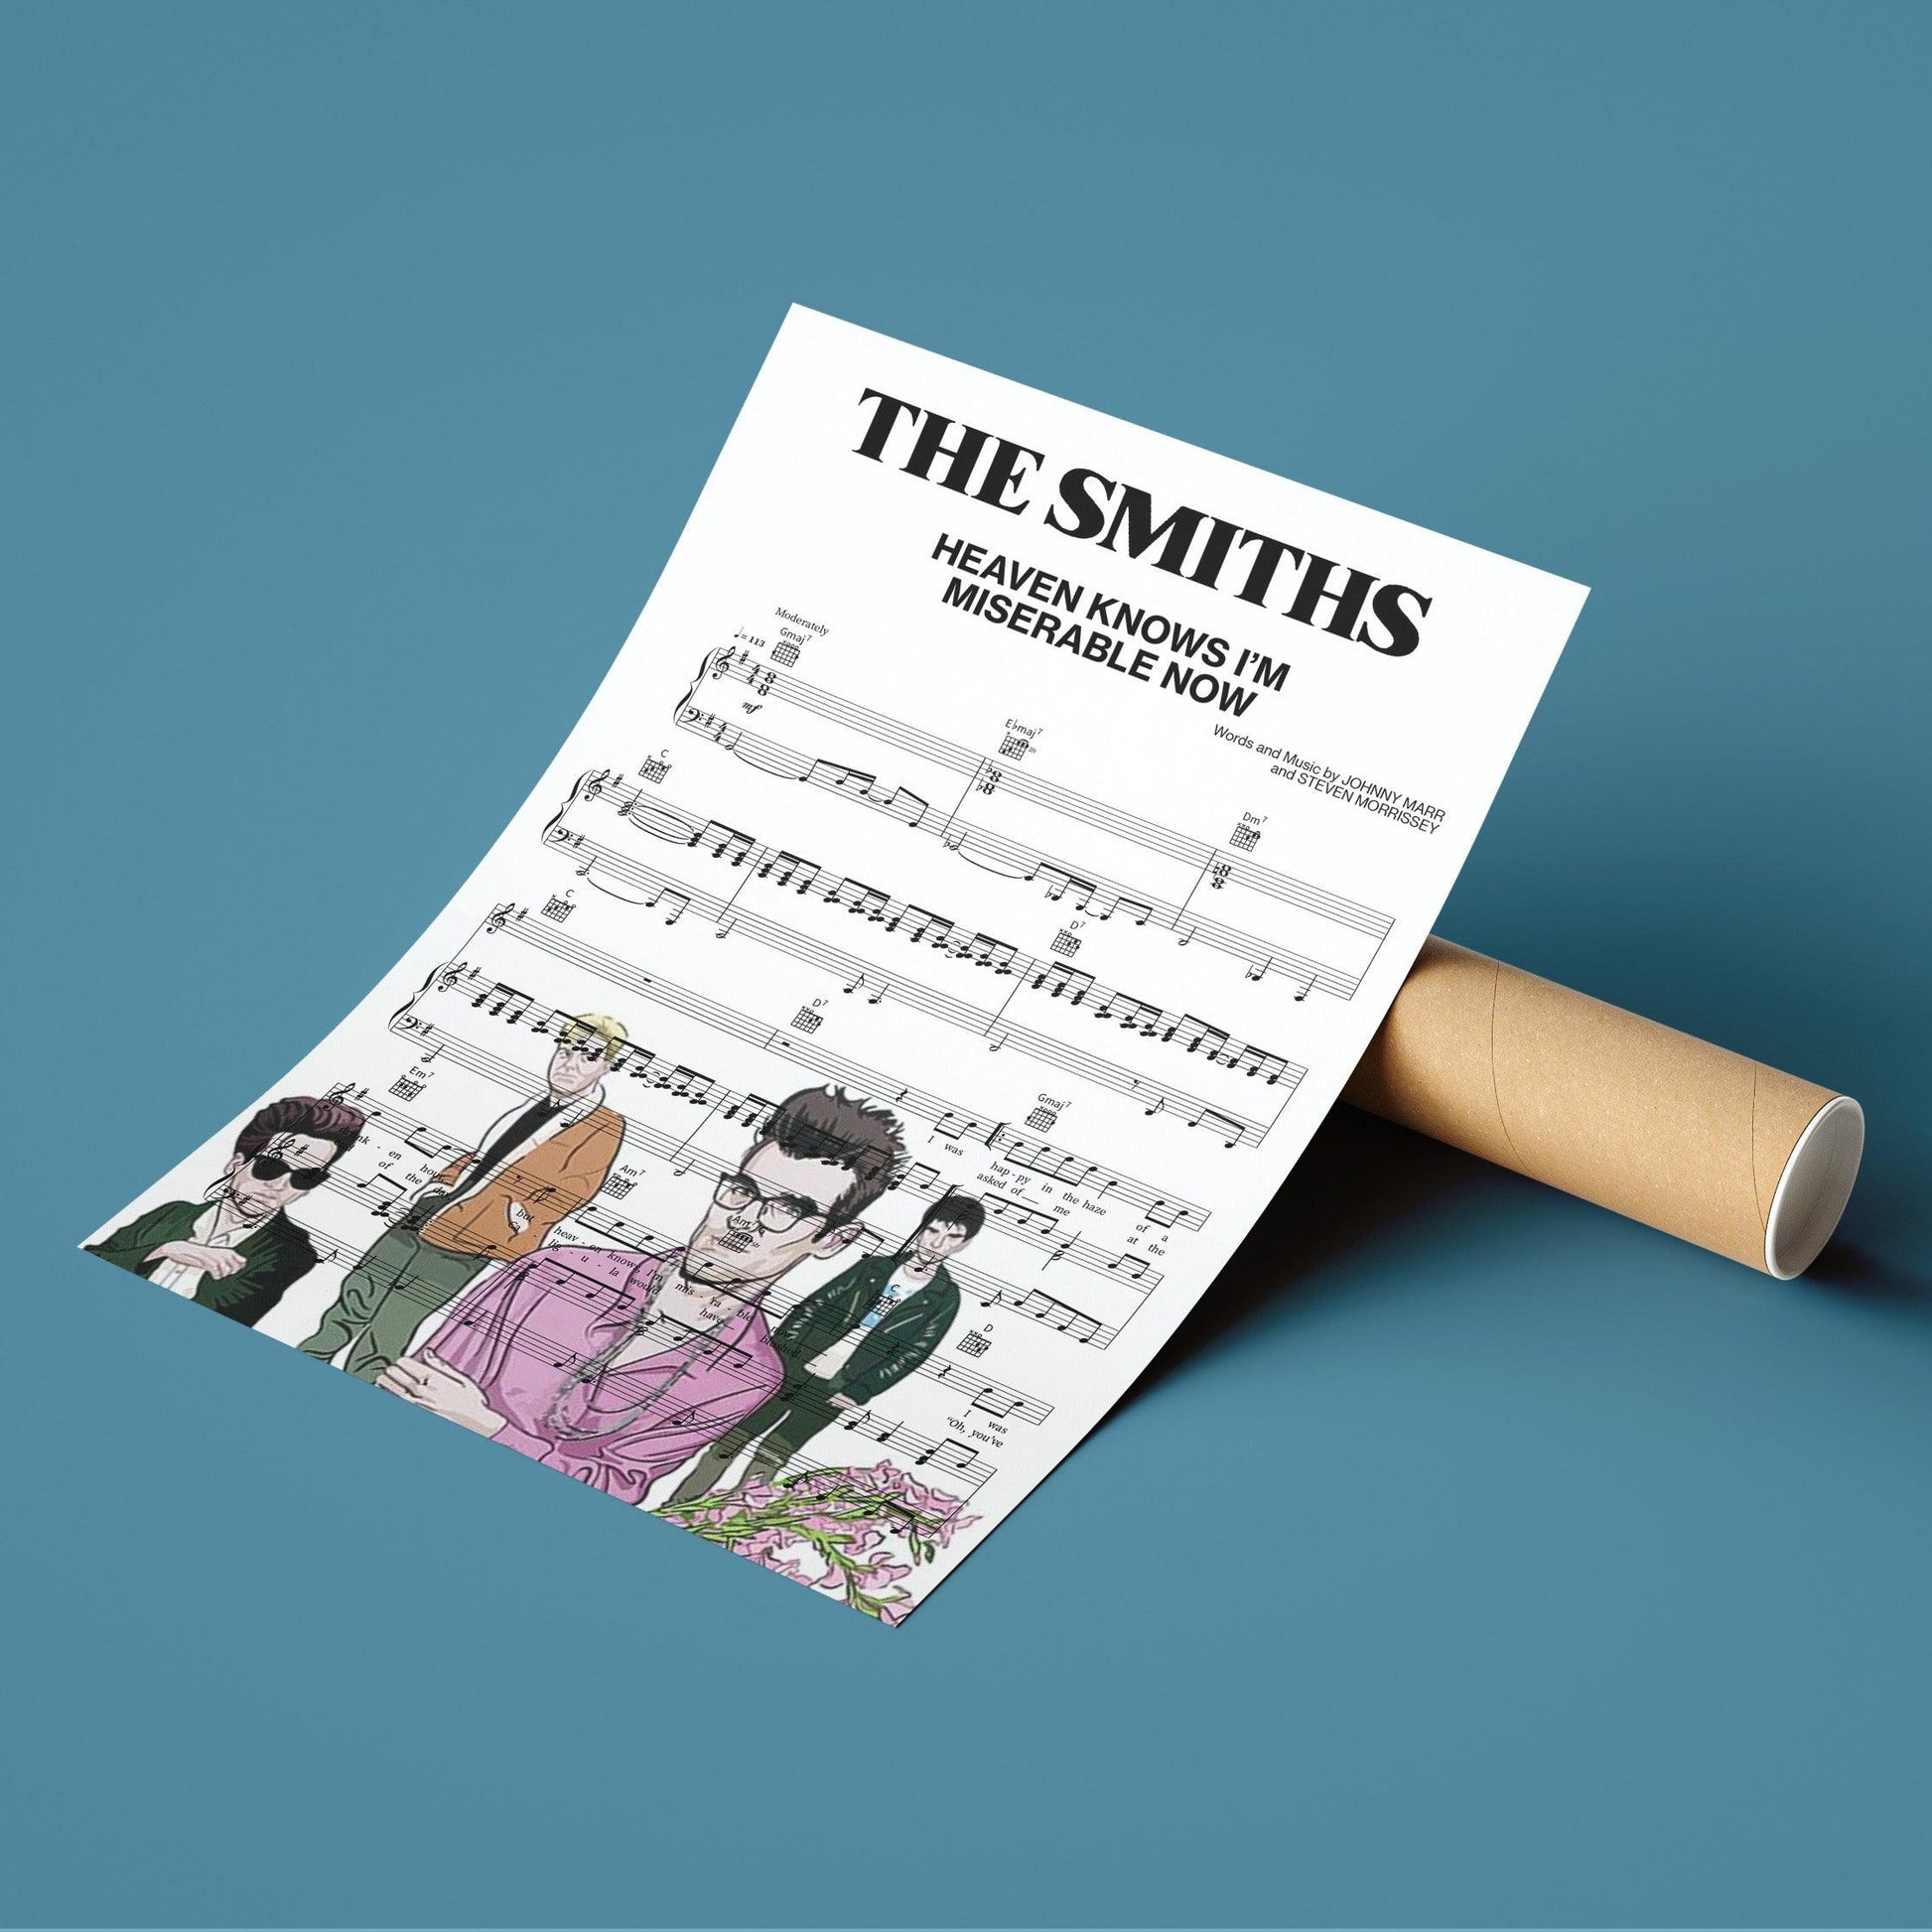 The Smiths - Heaven Knows I'm Miserable Now Print | Song Music Sheet Notes Print Everyone has a favorite song especially The Smiths Print, and now you can show the score as printed staff. The personal favorite song sheet print shows the song chosen as the score. 